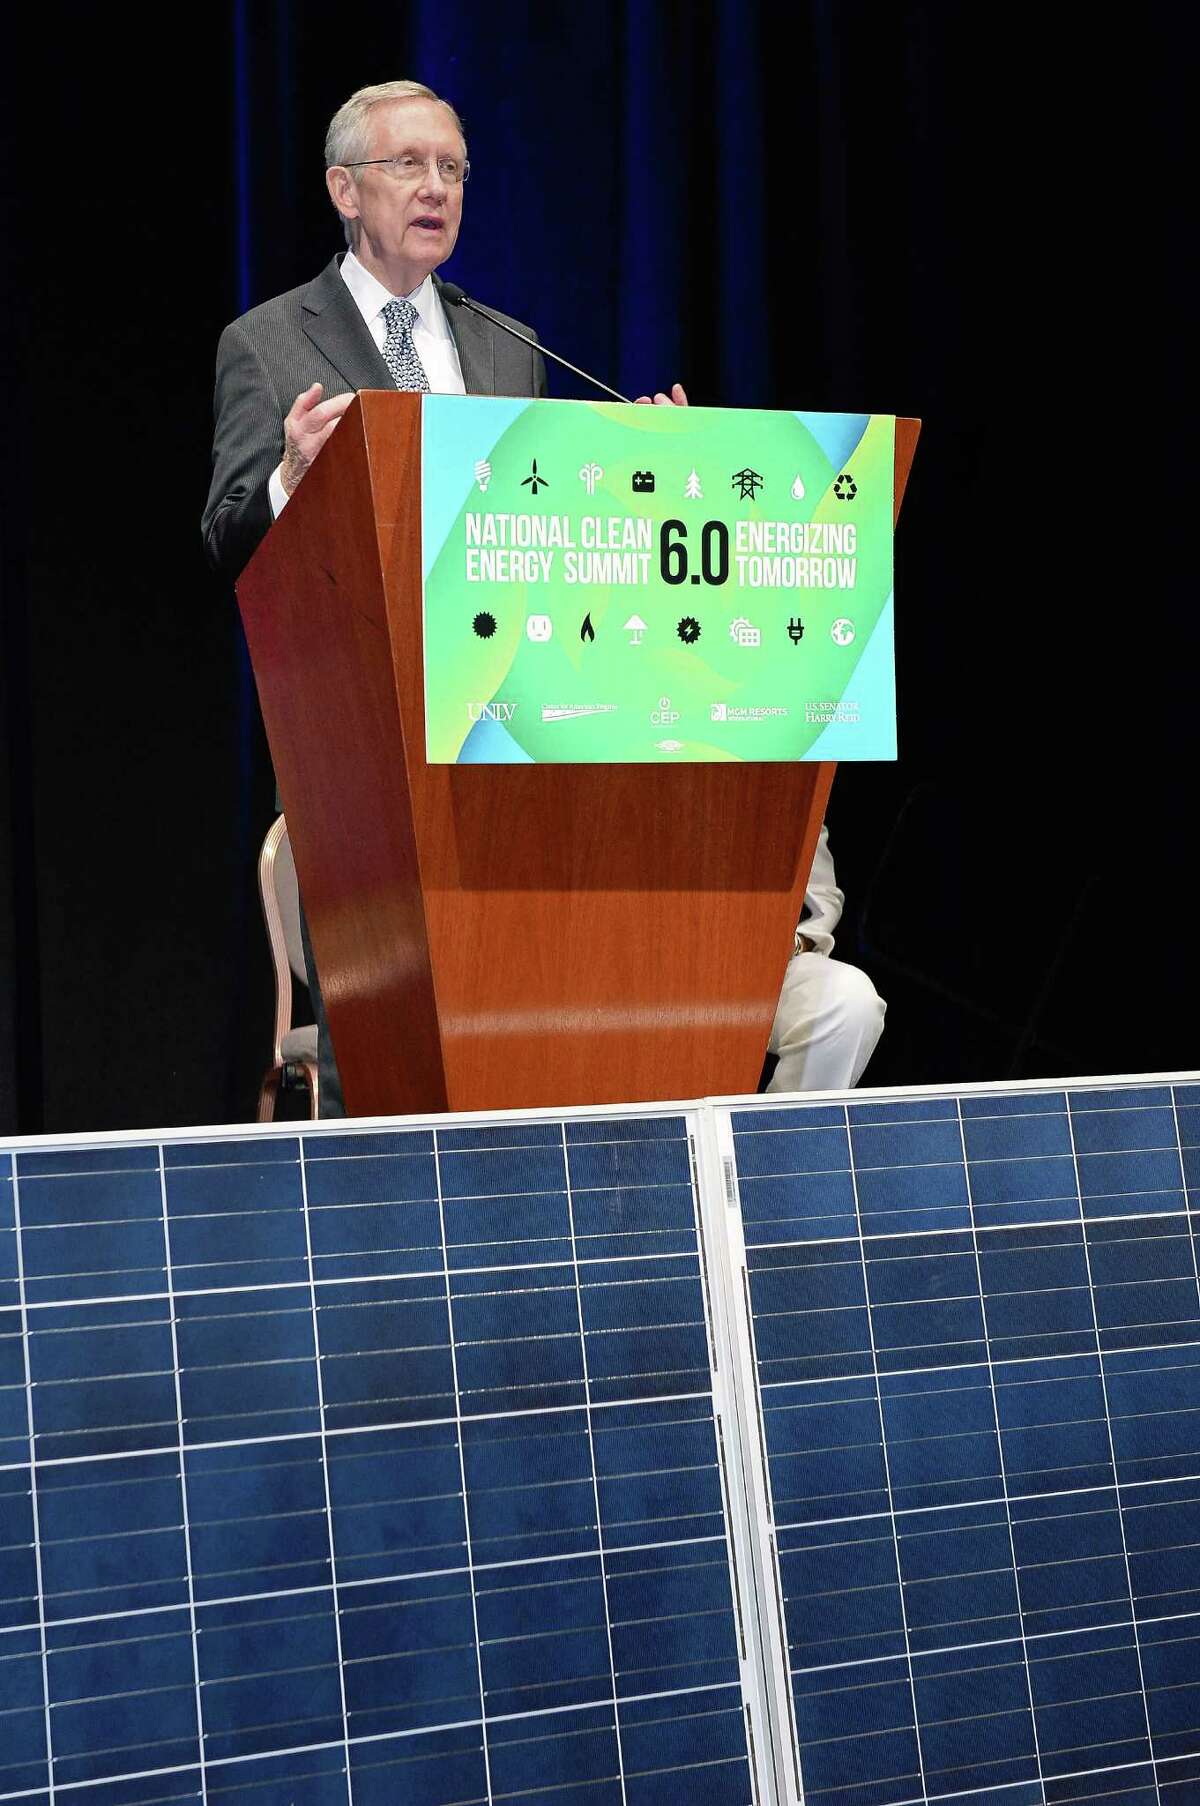 Sen. Harry Reid, D-Nev., speaks at the Mandalay Bay hotel. Reid predicted that the Las Vegas resort will inspire a trend for businesses and homeowners as rooftop solar generation becomes more affordable.